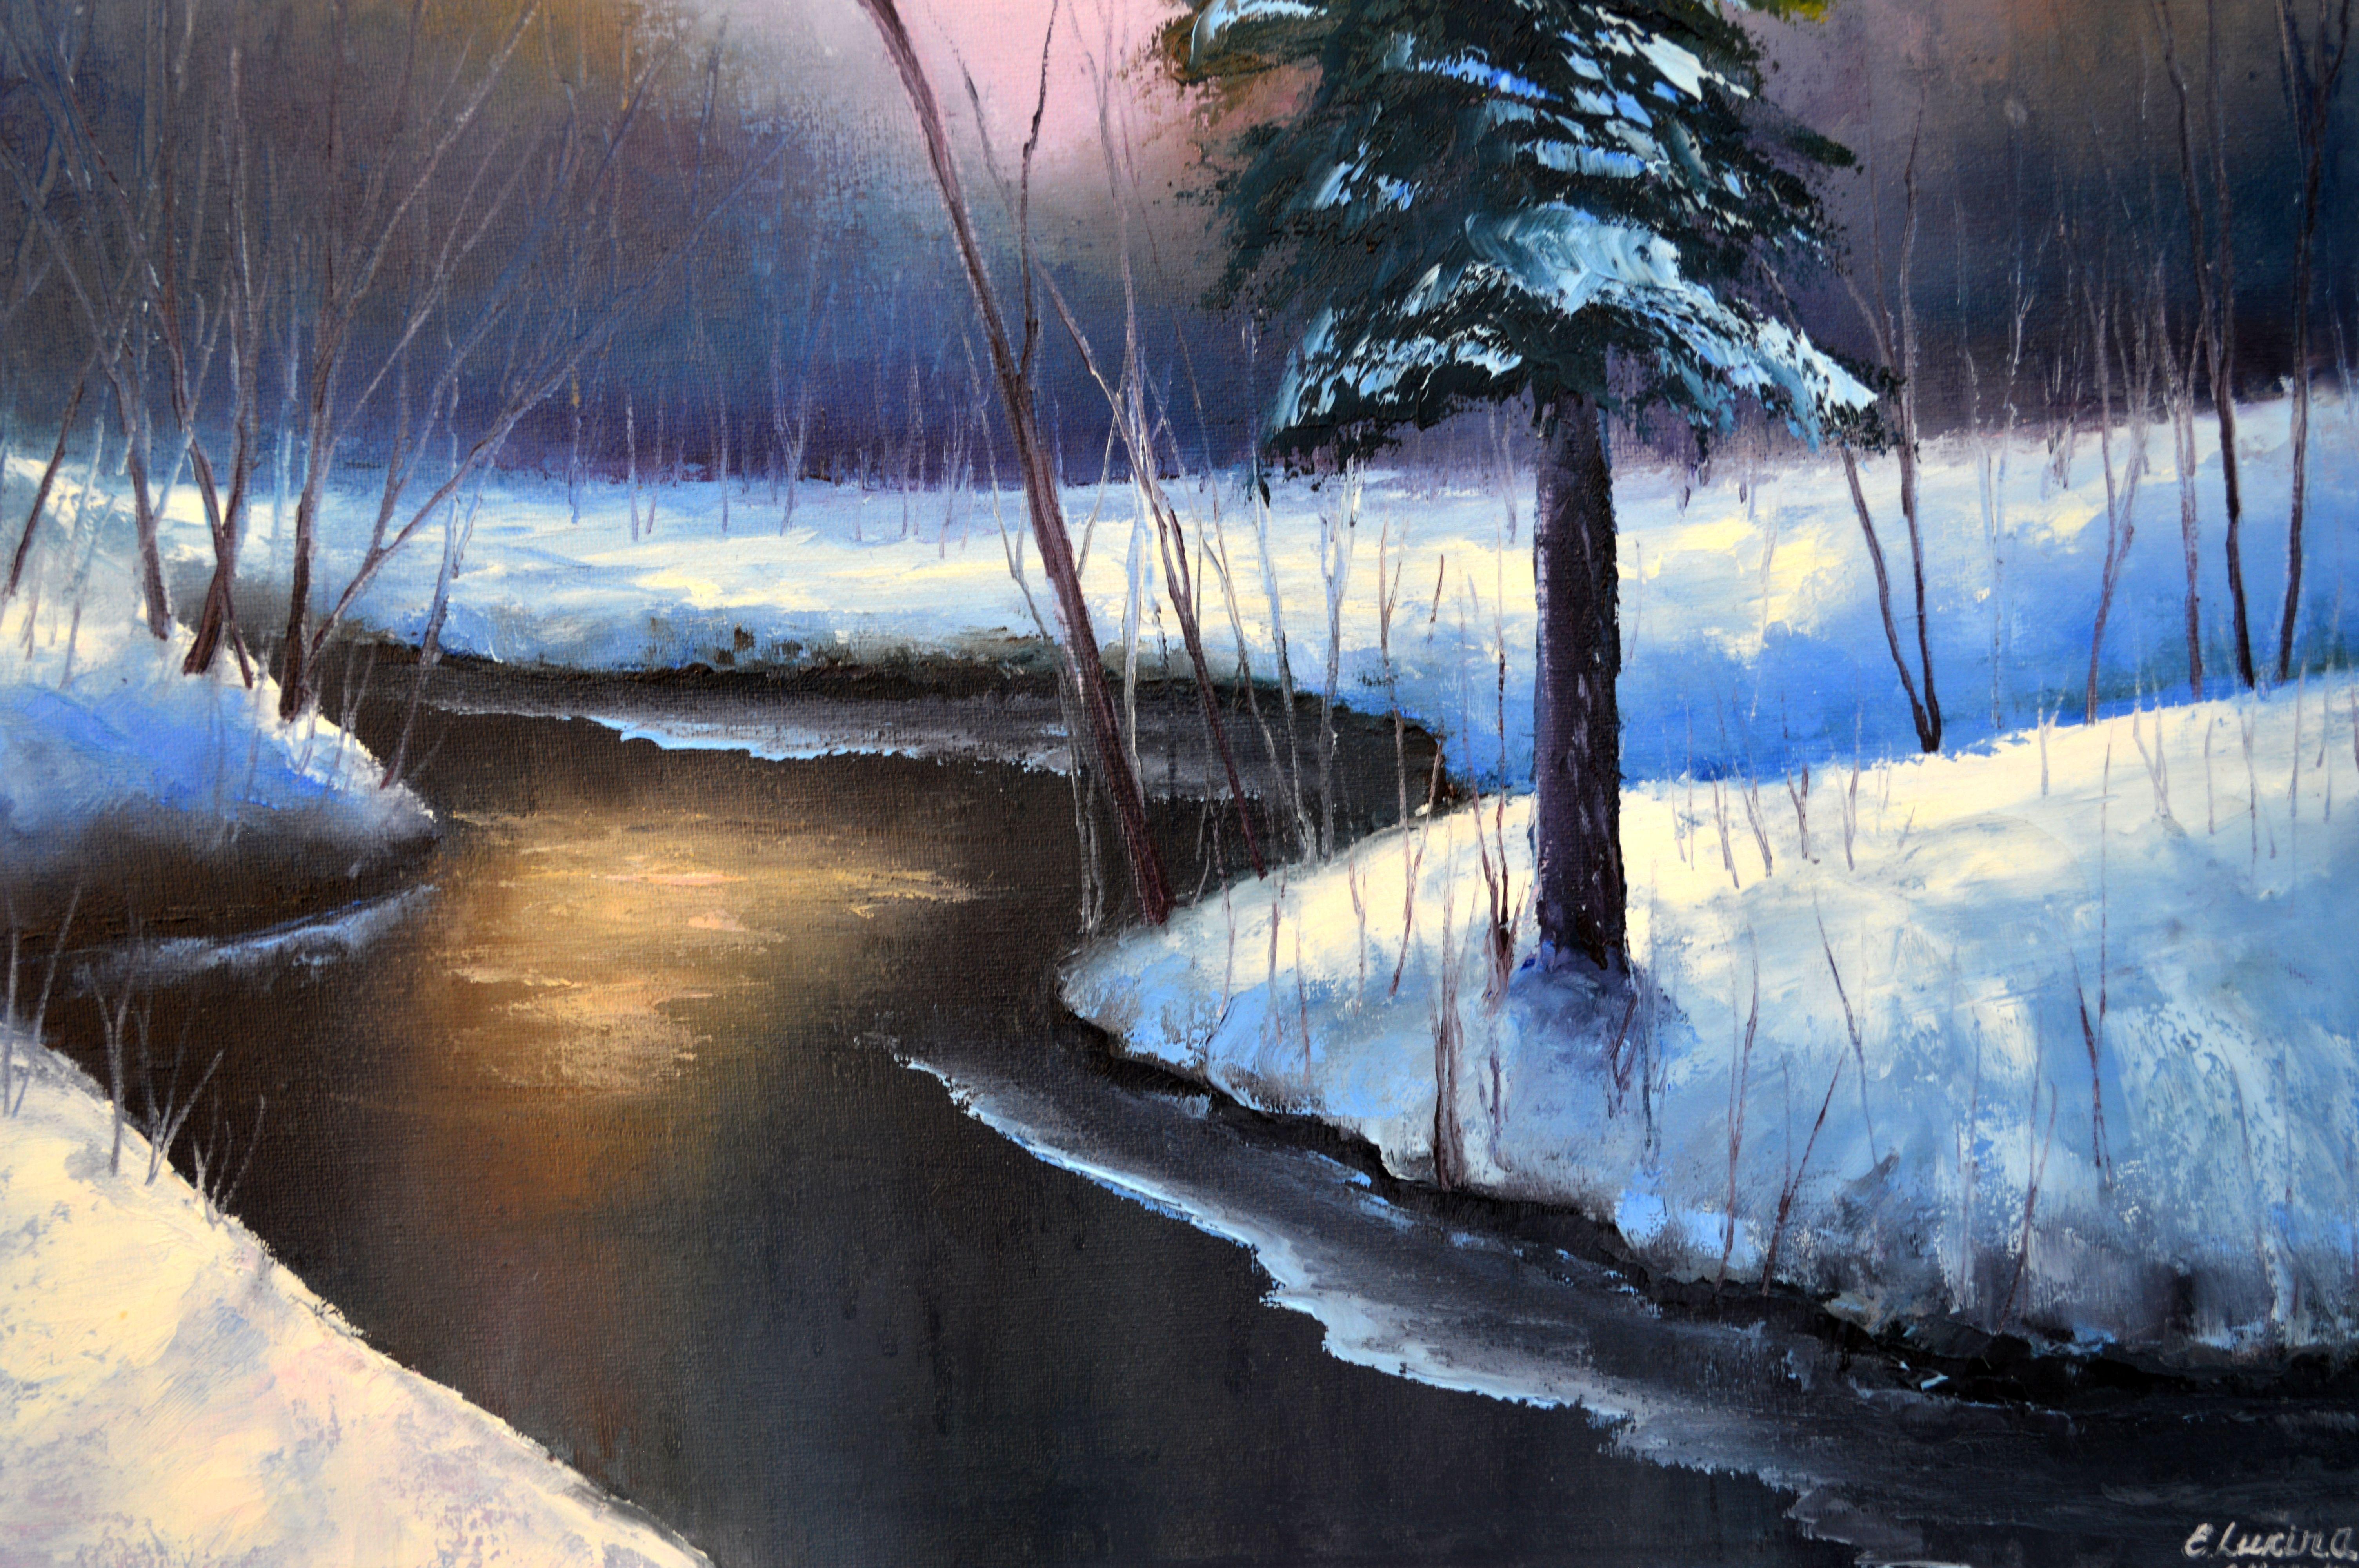 In this painting, I sought to capture the serene embrace of winter, as the hush of snow blankets the earth. This piece is a dance of cool and warm hues, intertwining to depict the quietude of nature's slumber and the warmth of cherished memories. I